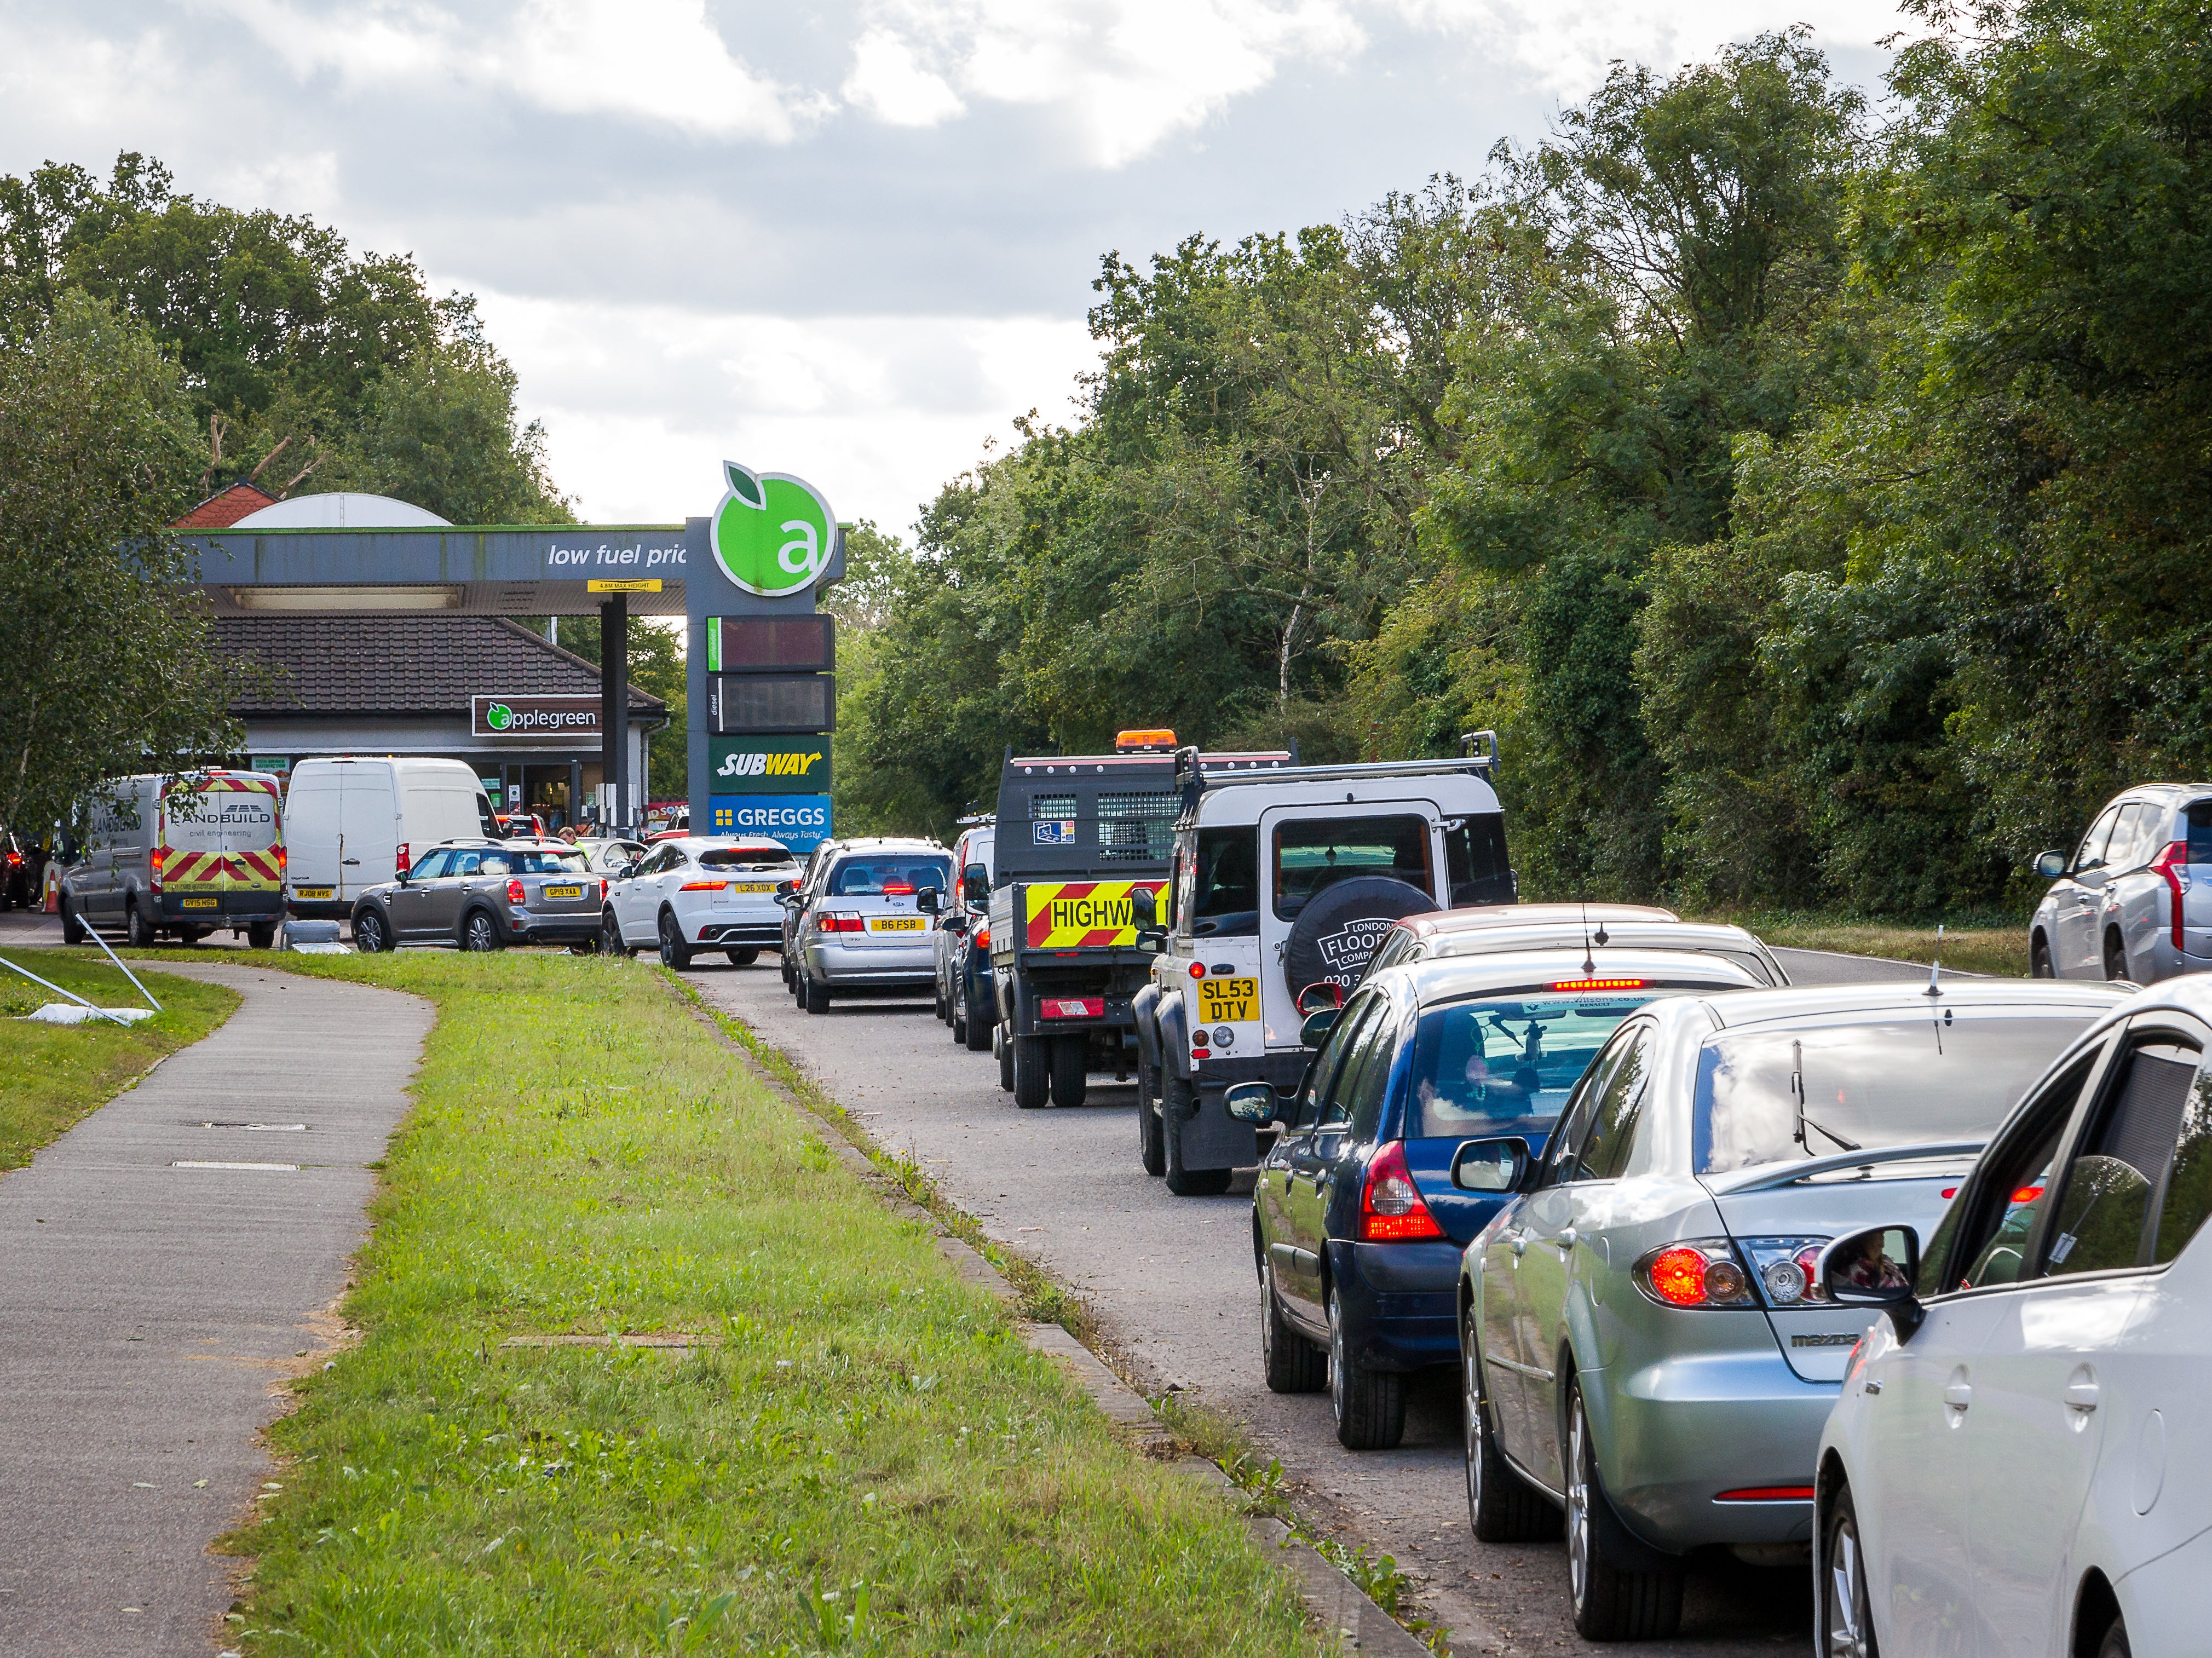 One in three petrol stations were forced to close in southern England amid oil terminal protests, according to fuel campaigners